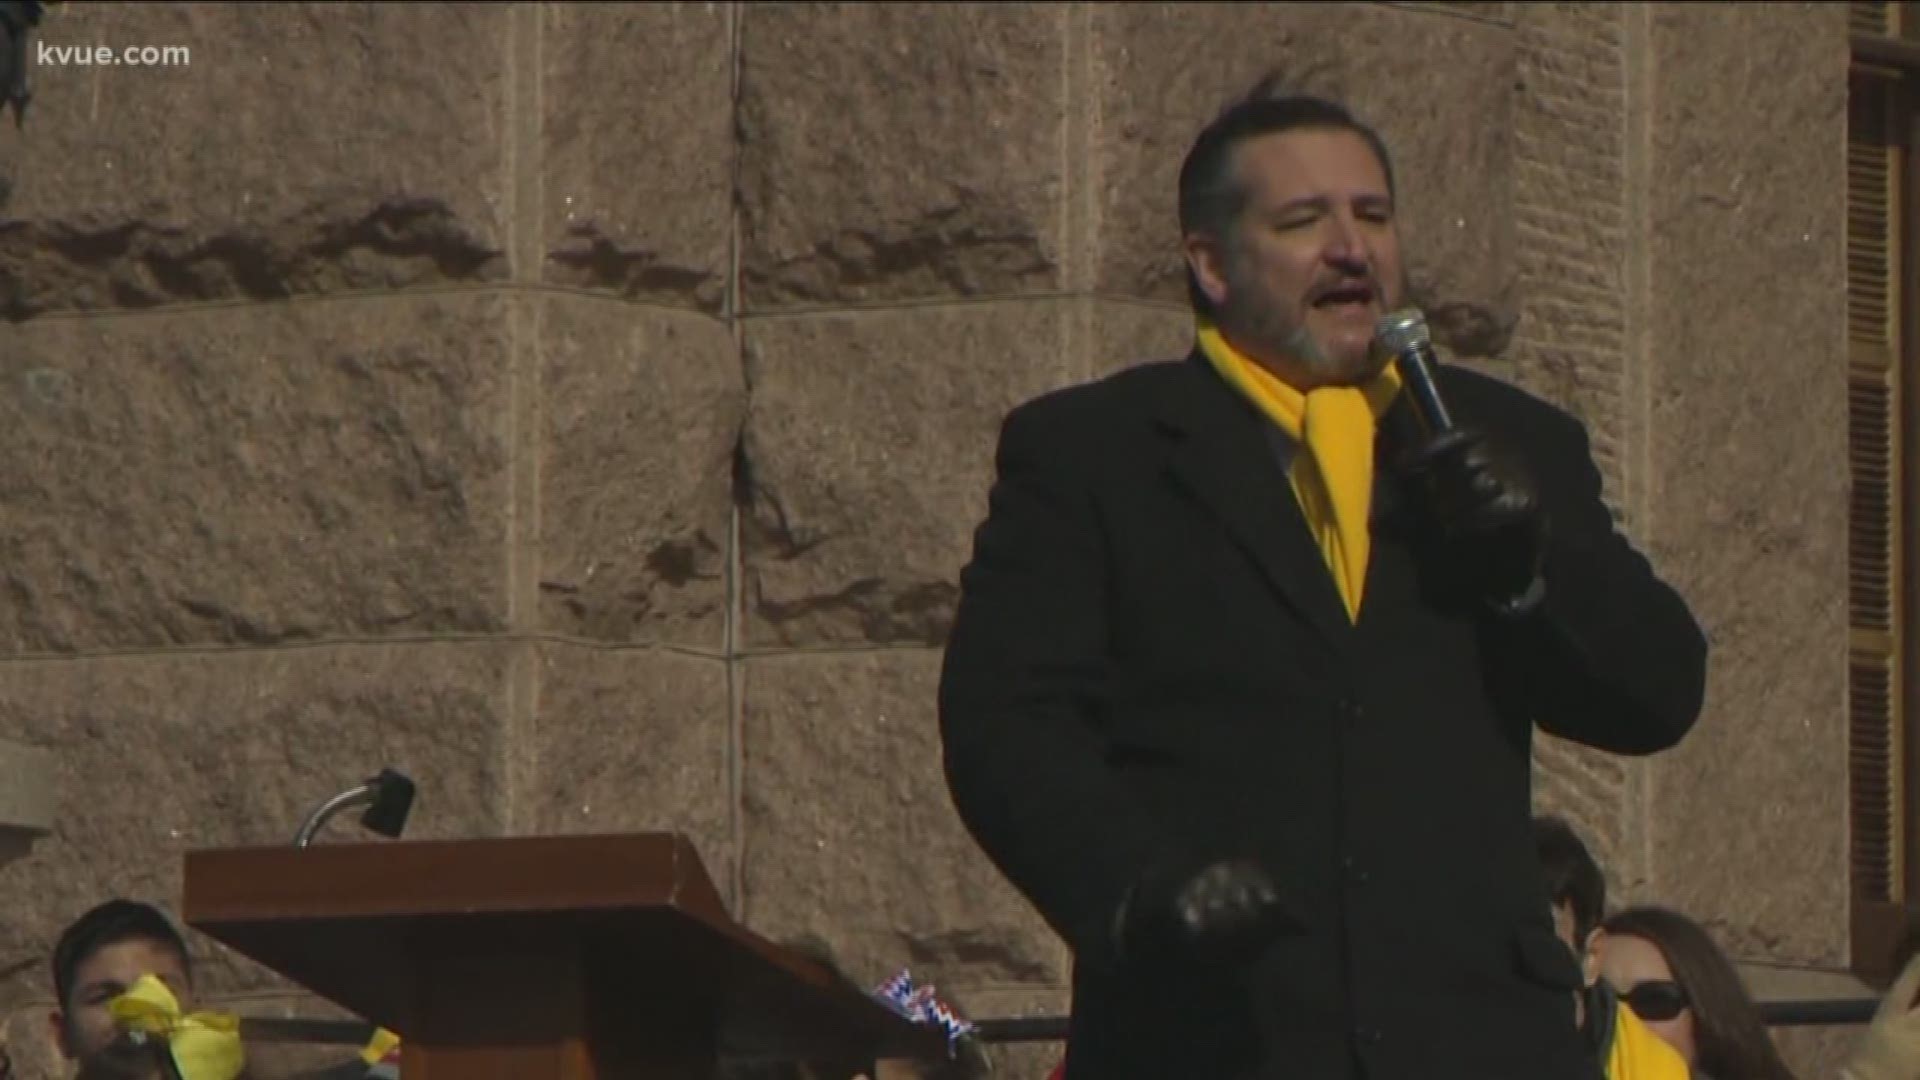 U.S. Senator Ted Cruz was in Austin on Wednesday to drum up support for school choice.